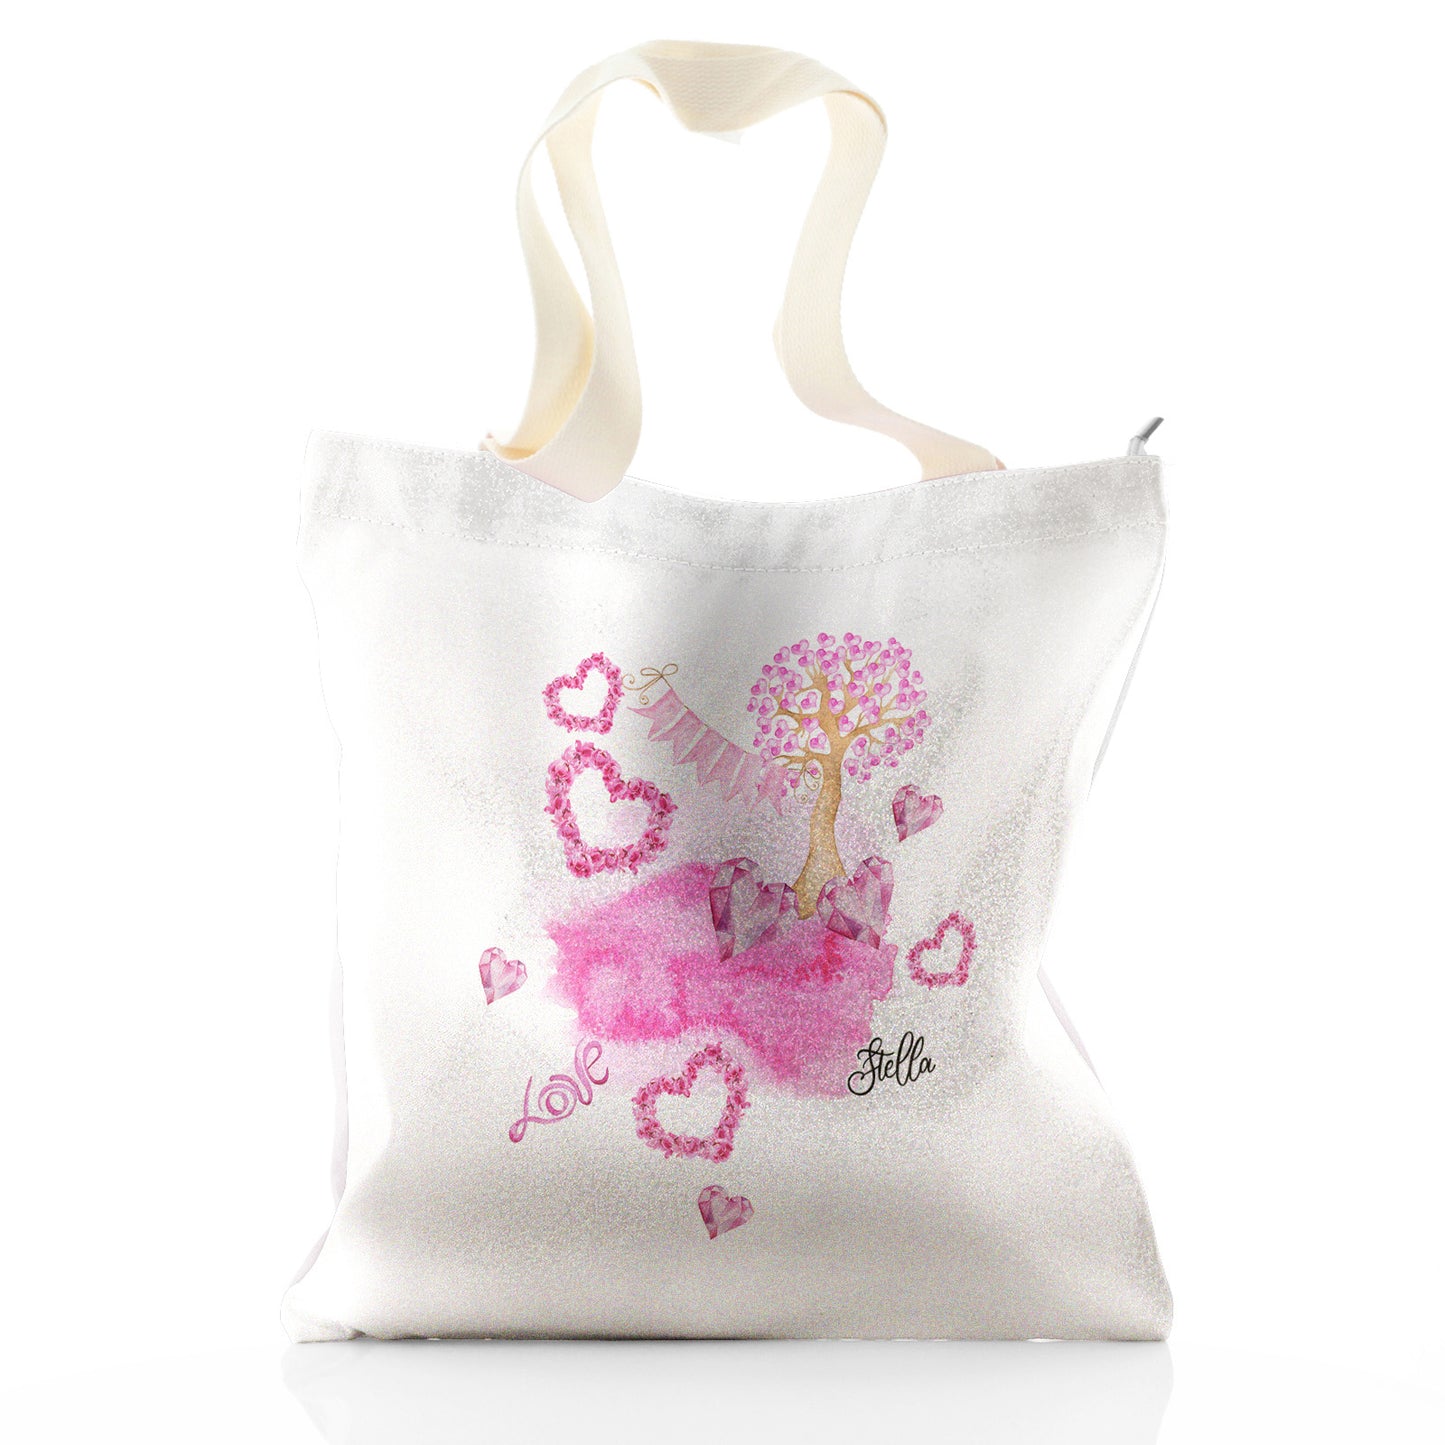 Personalised Glitter Tote Bag with Stylish Text and Pink Love Landscape Print